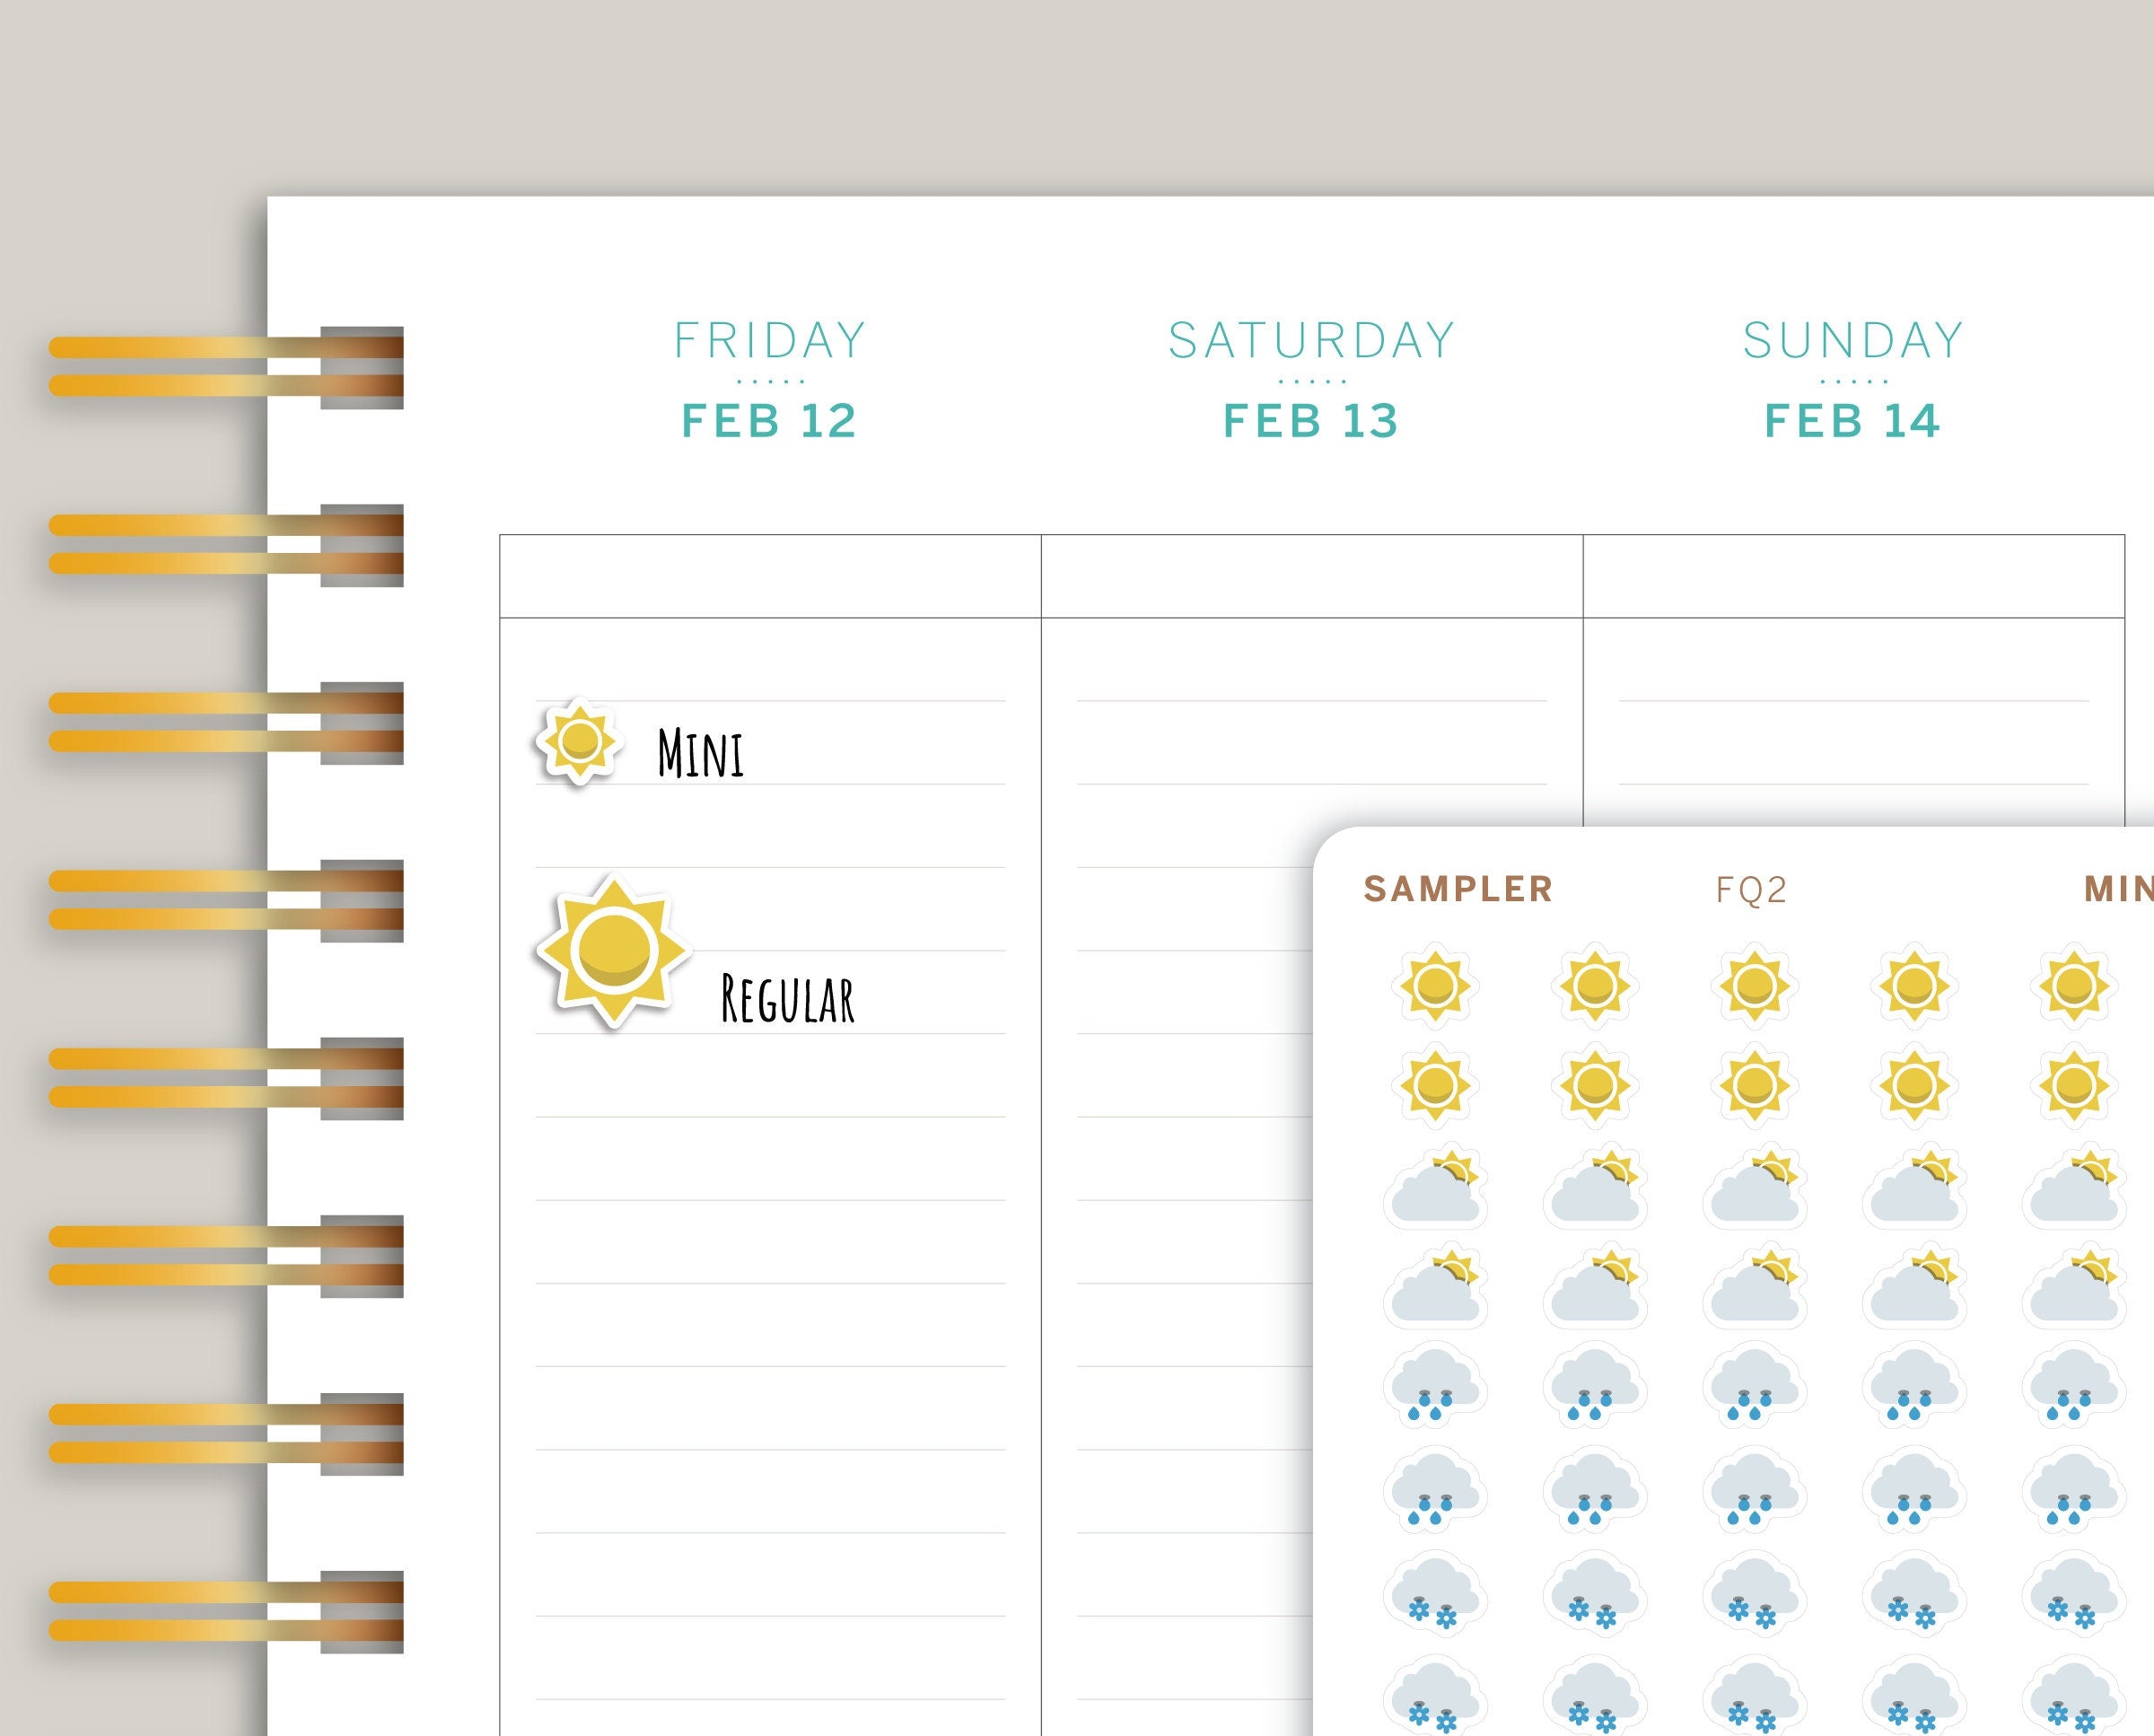 Weather Sampler, Tracker | Sunny, Partly Cloudy, Rain, & Snow | Icon Planner Stickers FQ2